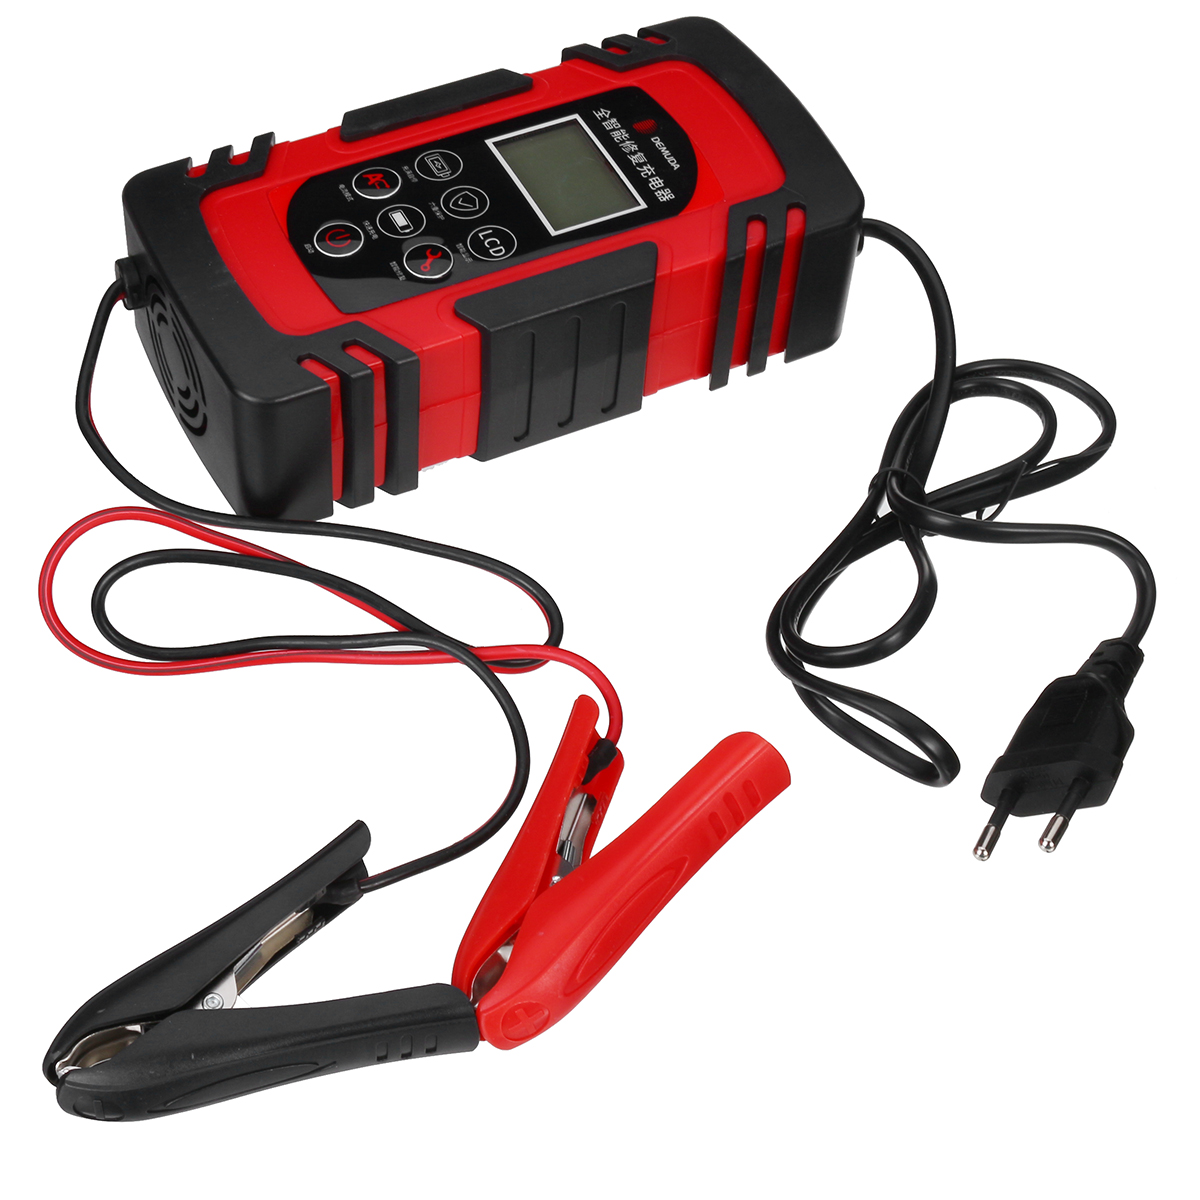 100W 12V/24V LCD Car Battery Charger Pulse Trickle Motorcycle Boat RV Maintainer Smart Repair Battery Charging Activation - Auto GoShop